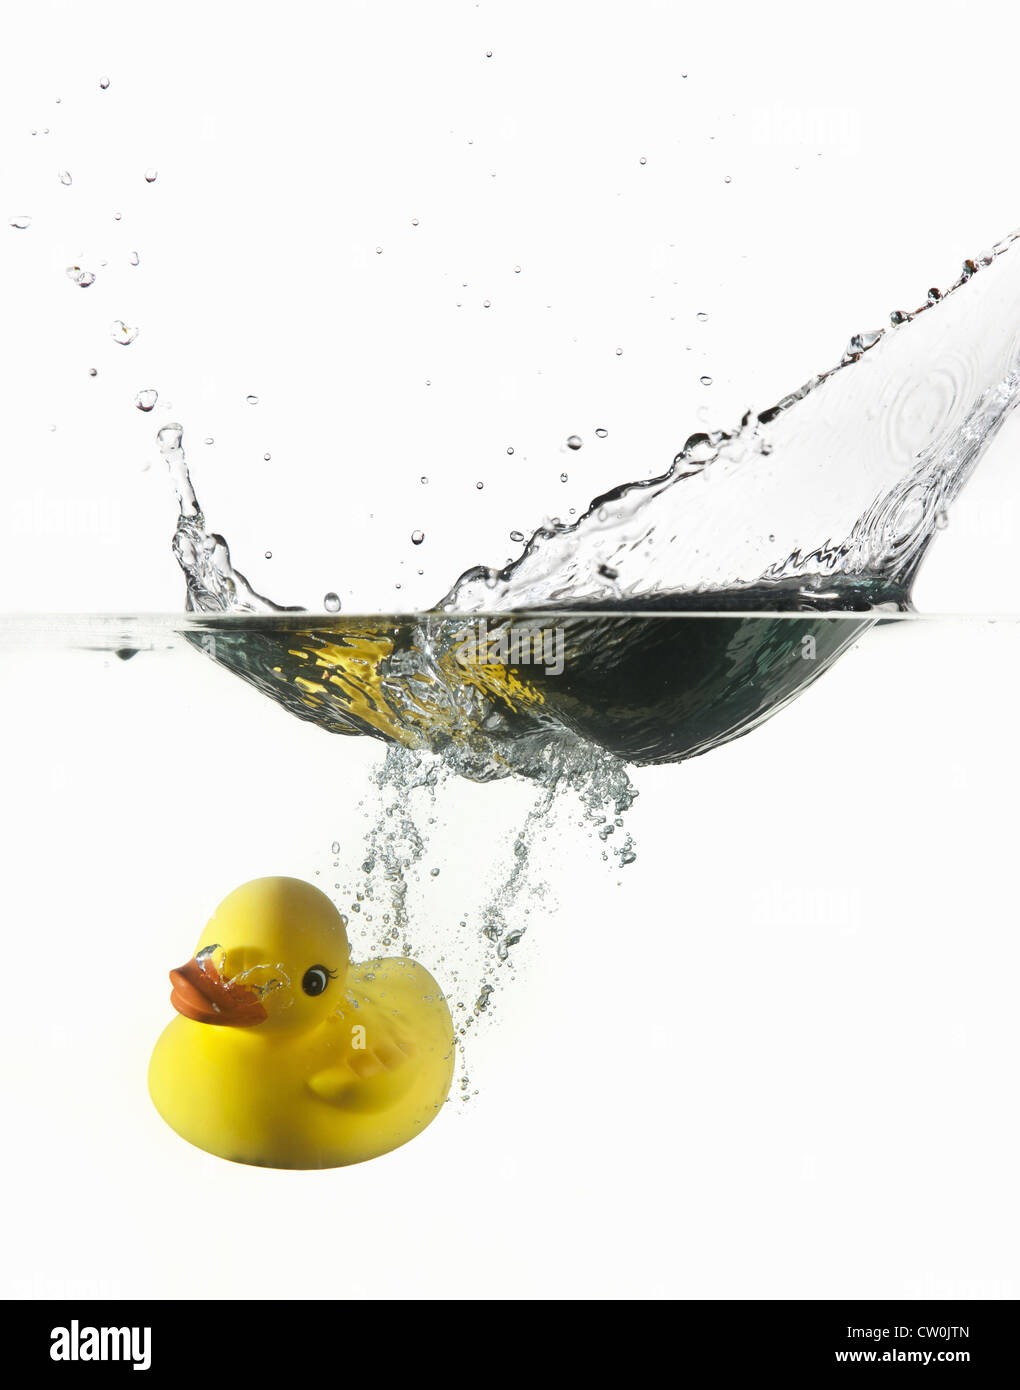 Rubber duck plunging into water Stock Photo